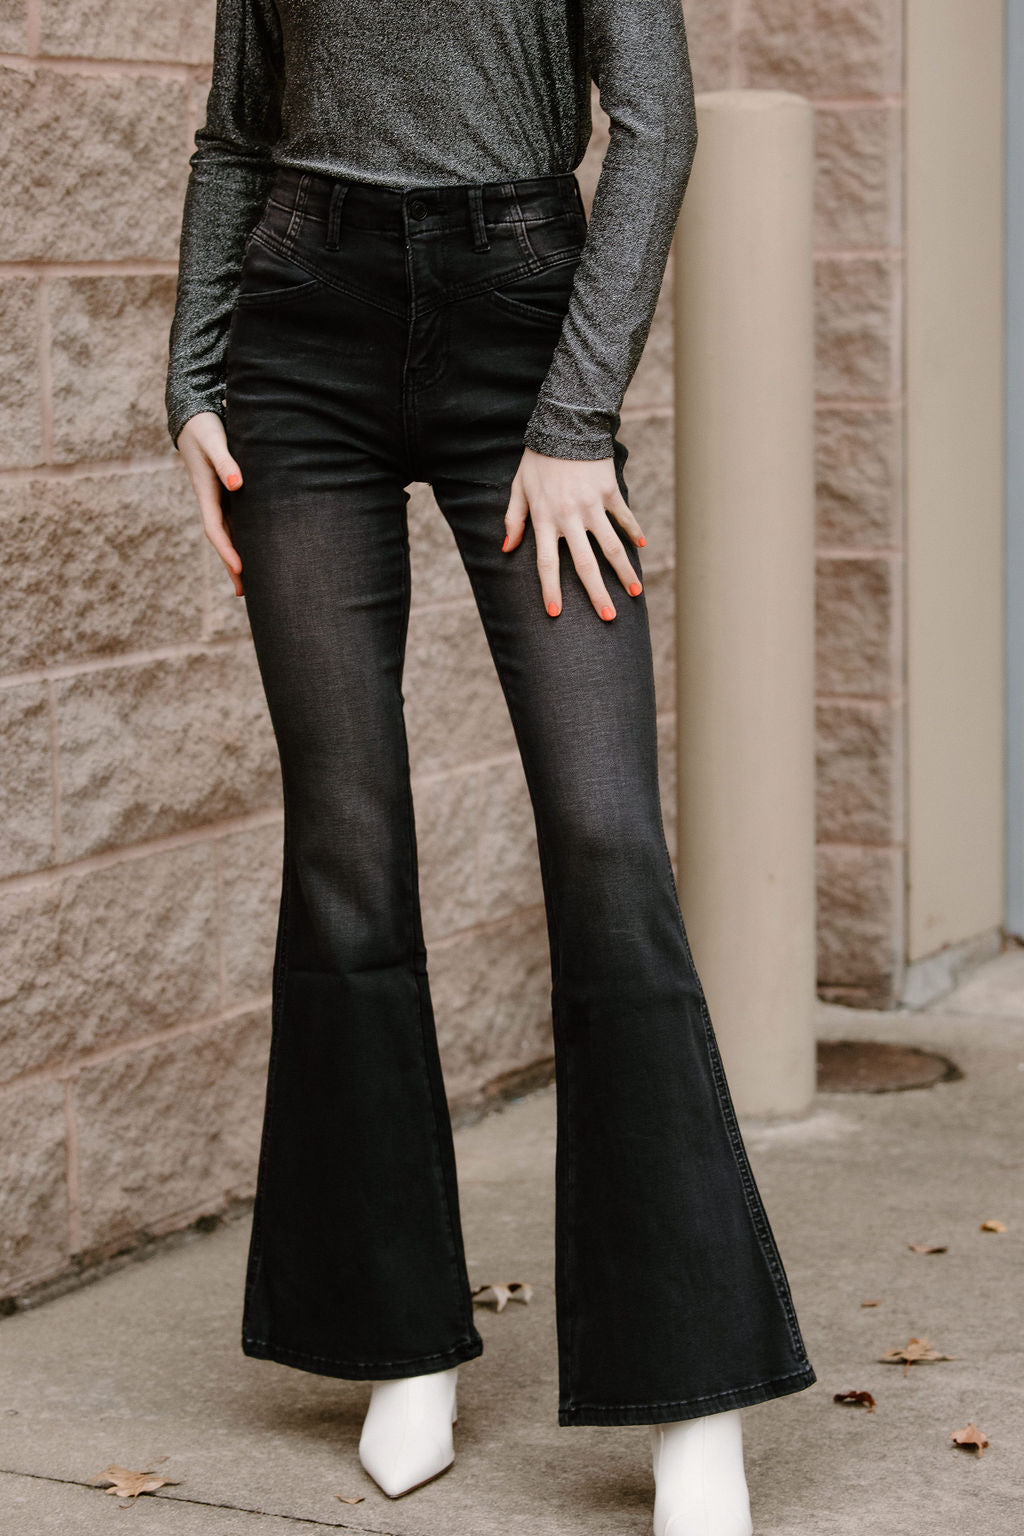 Black Flare Jeans - The Red Thread Boutique